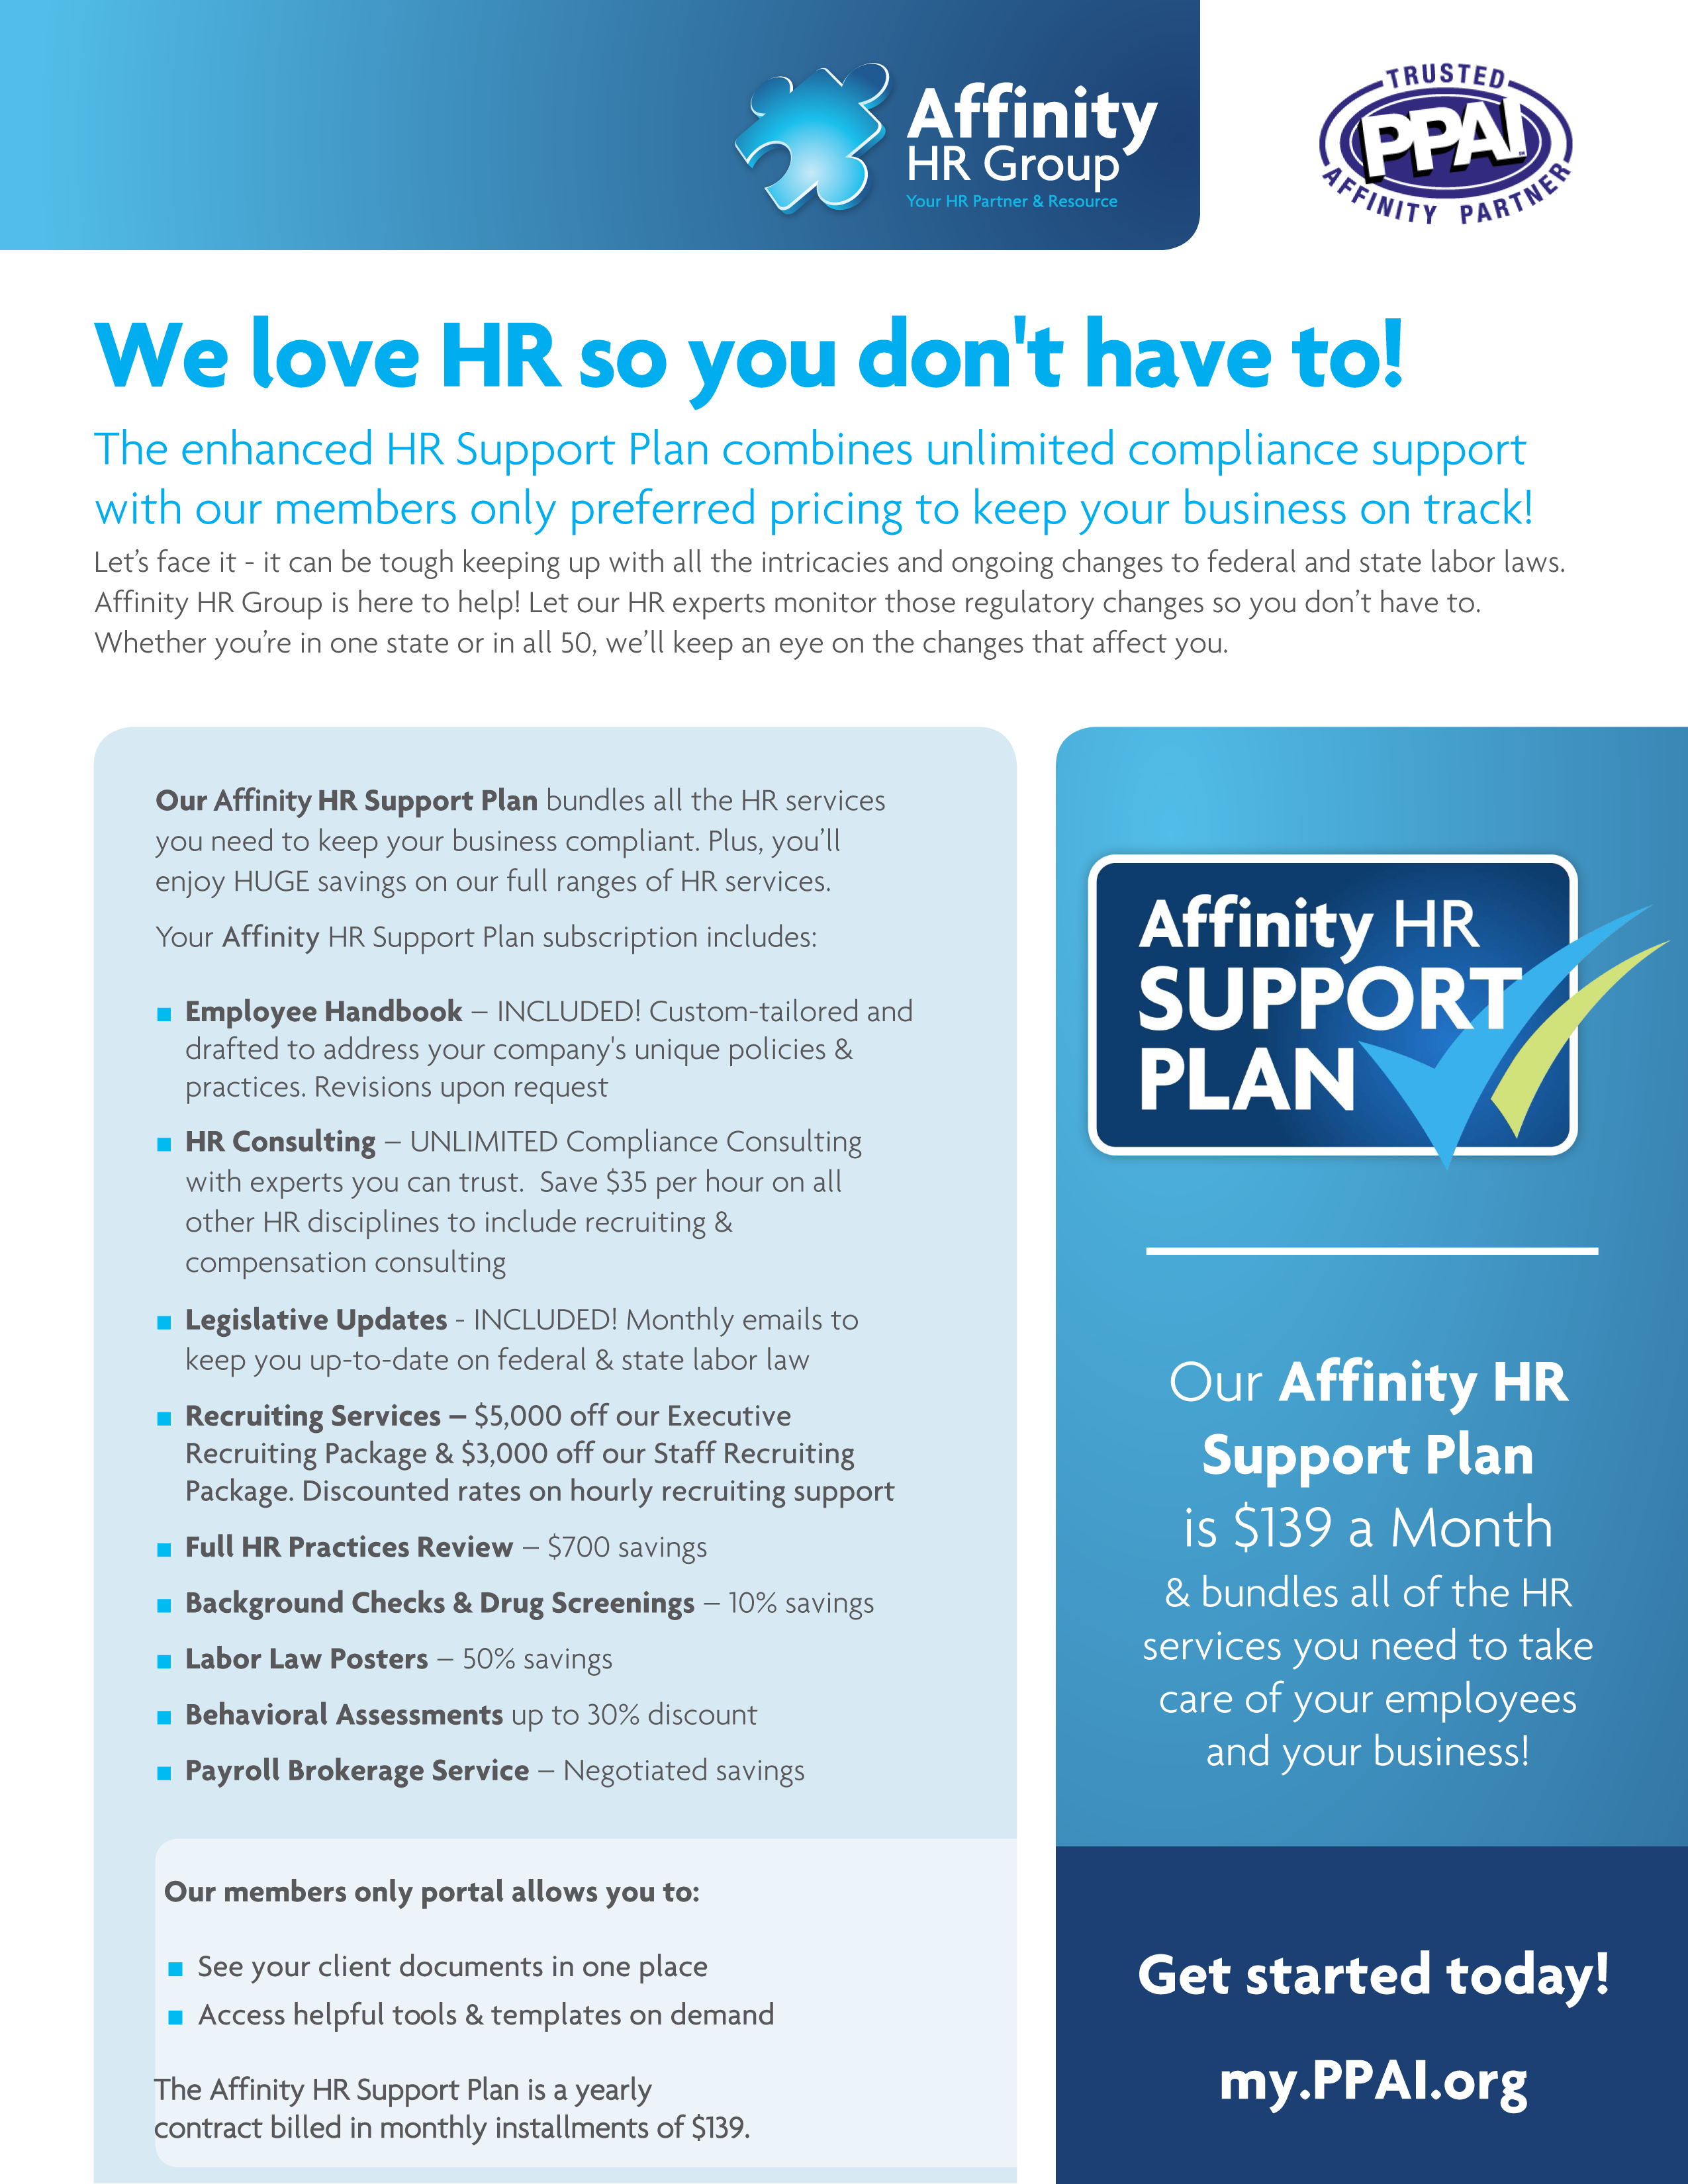 Affinity HR Group - HR Support Plan